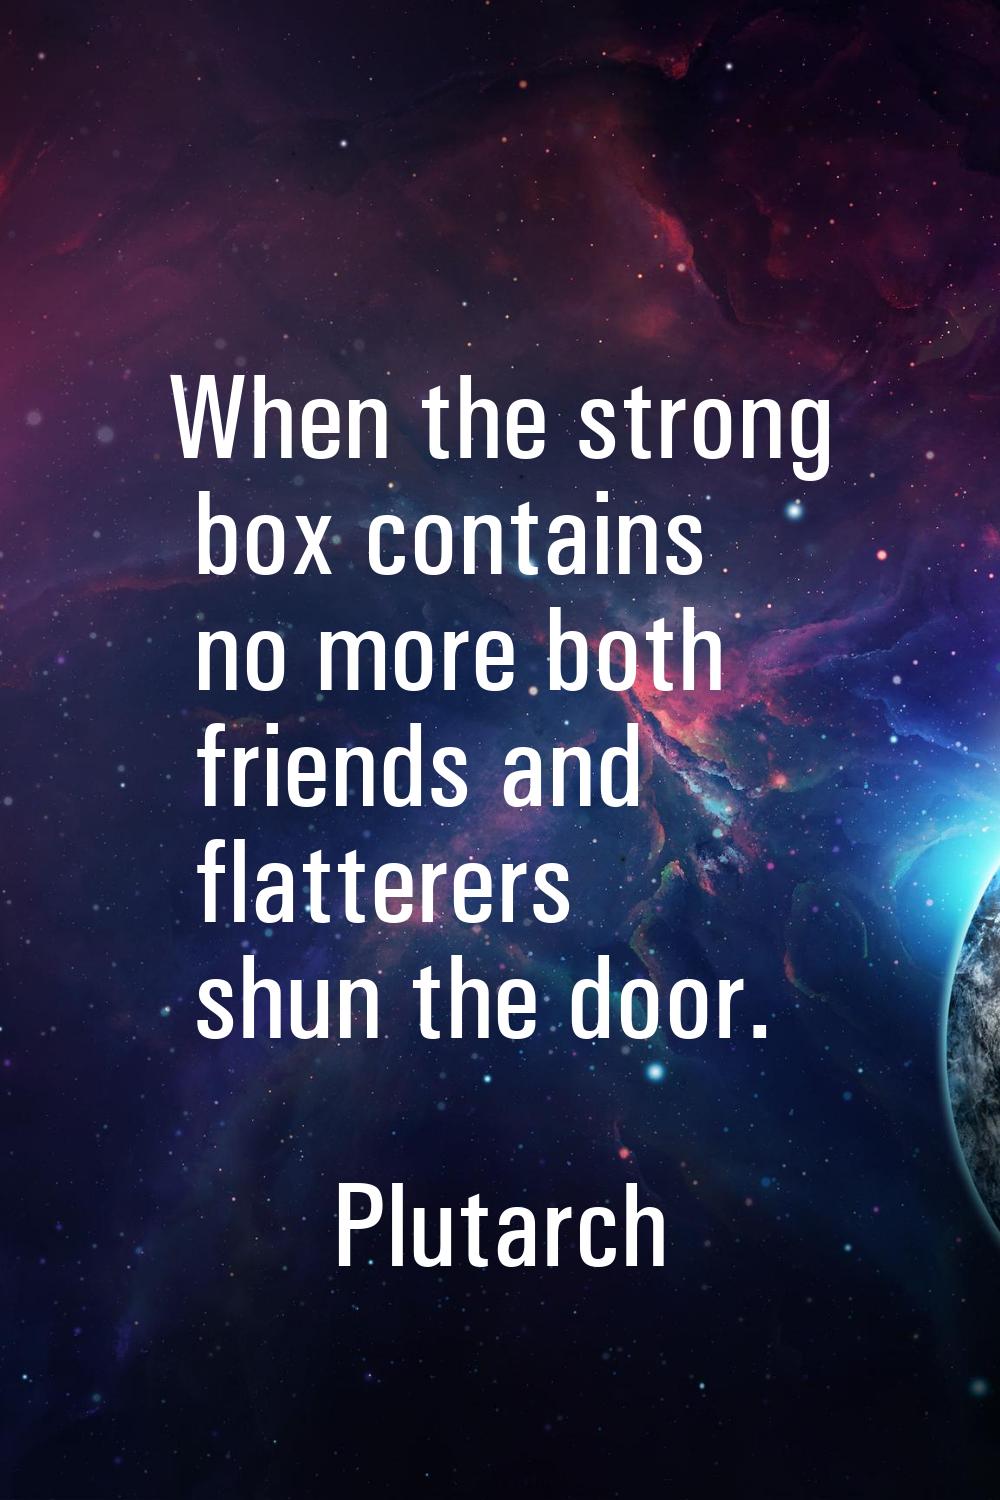 When the strong box contains no more both friends and flatterers shun the door.